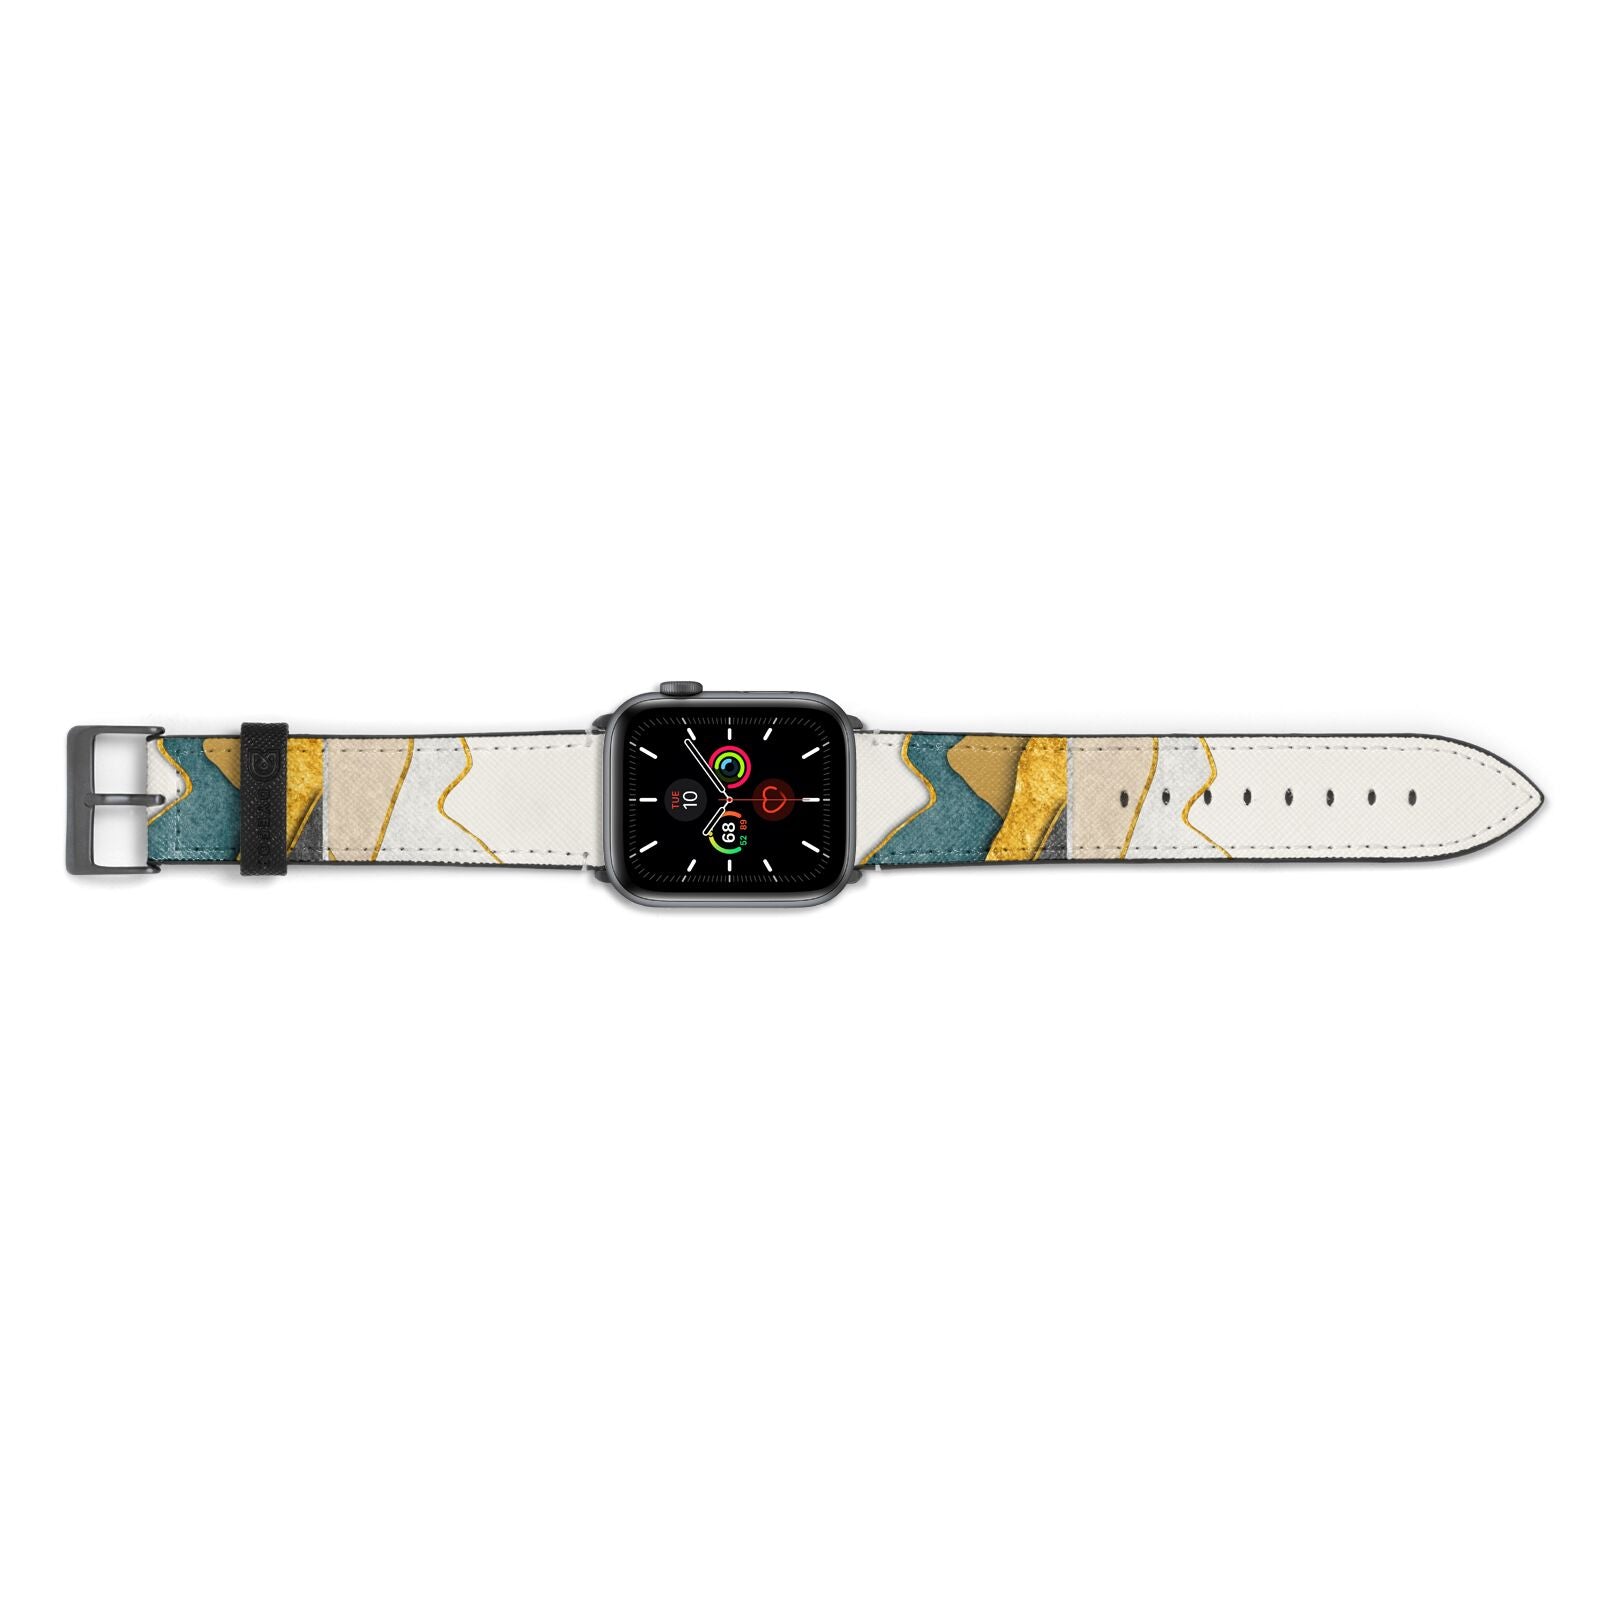 Abstract Mountain Apple Watch Strap Landscape Image Space Grey Hardware